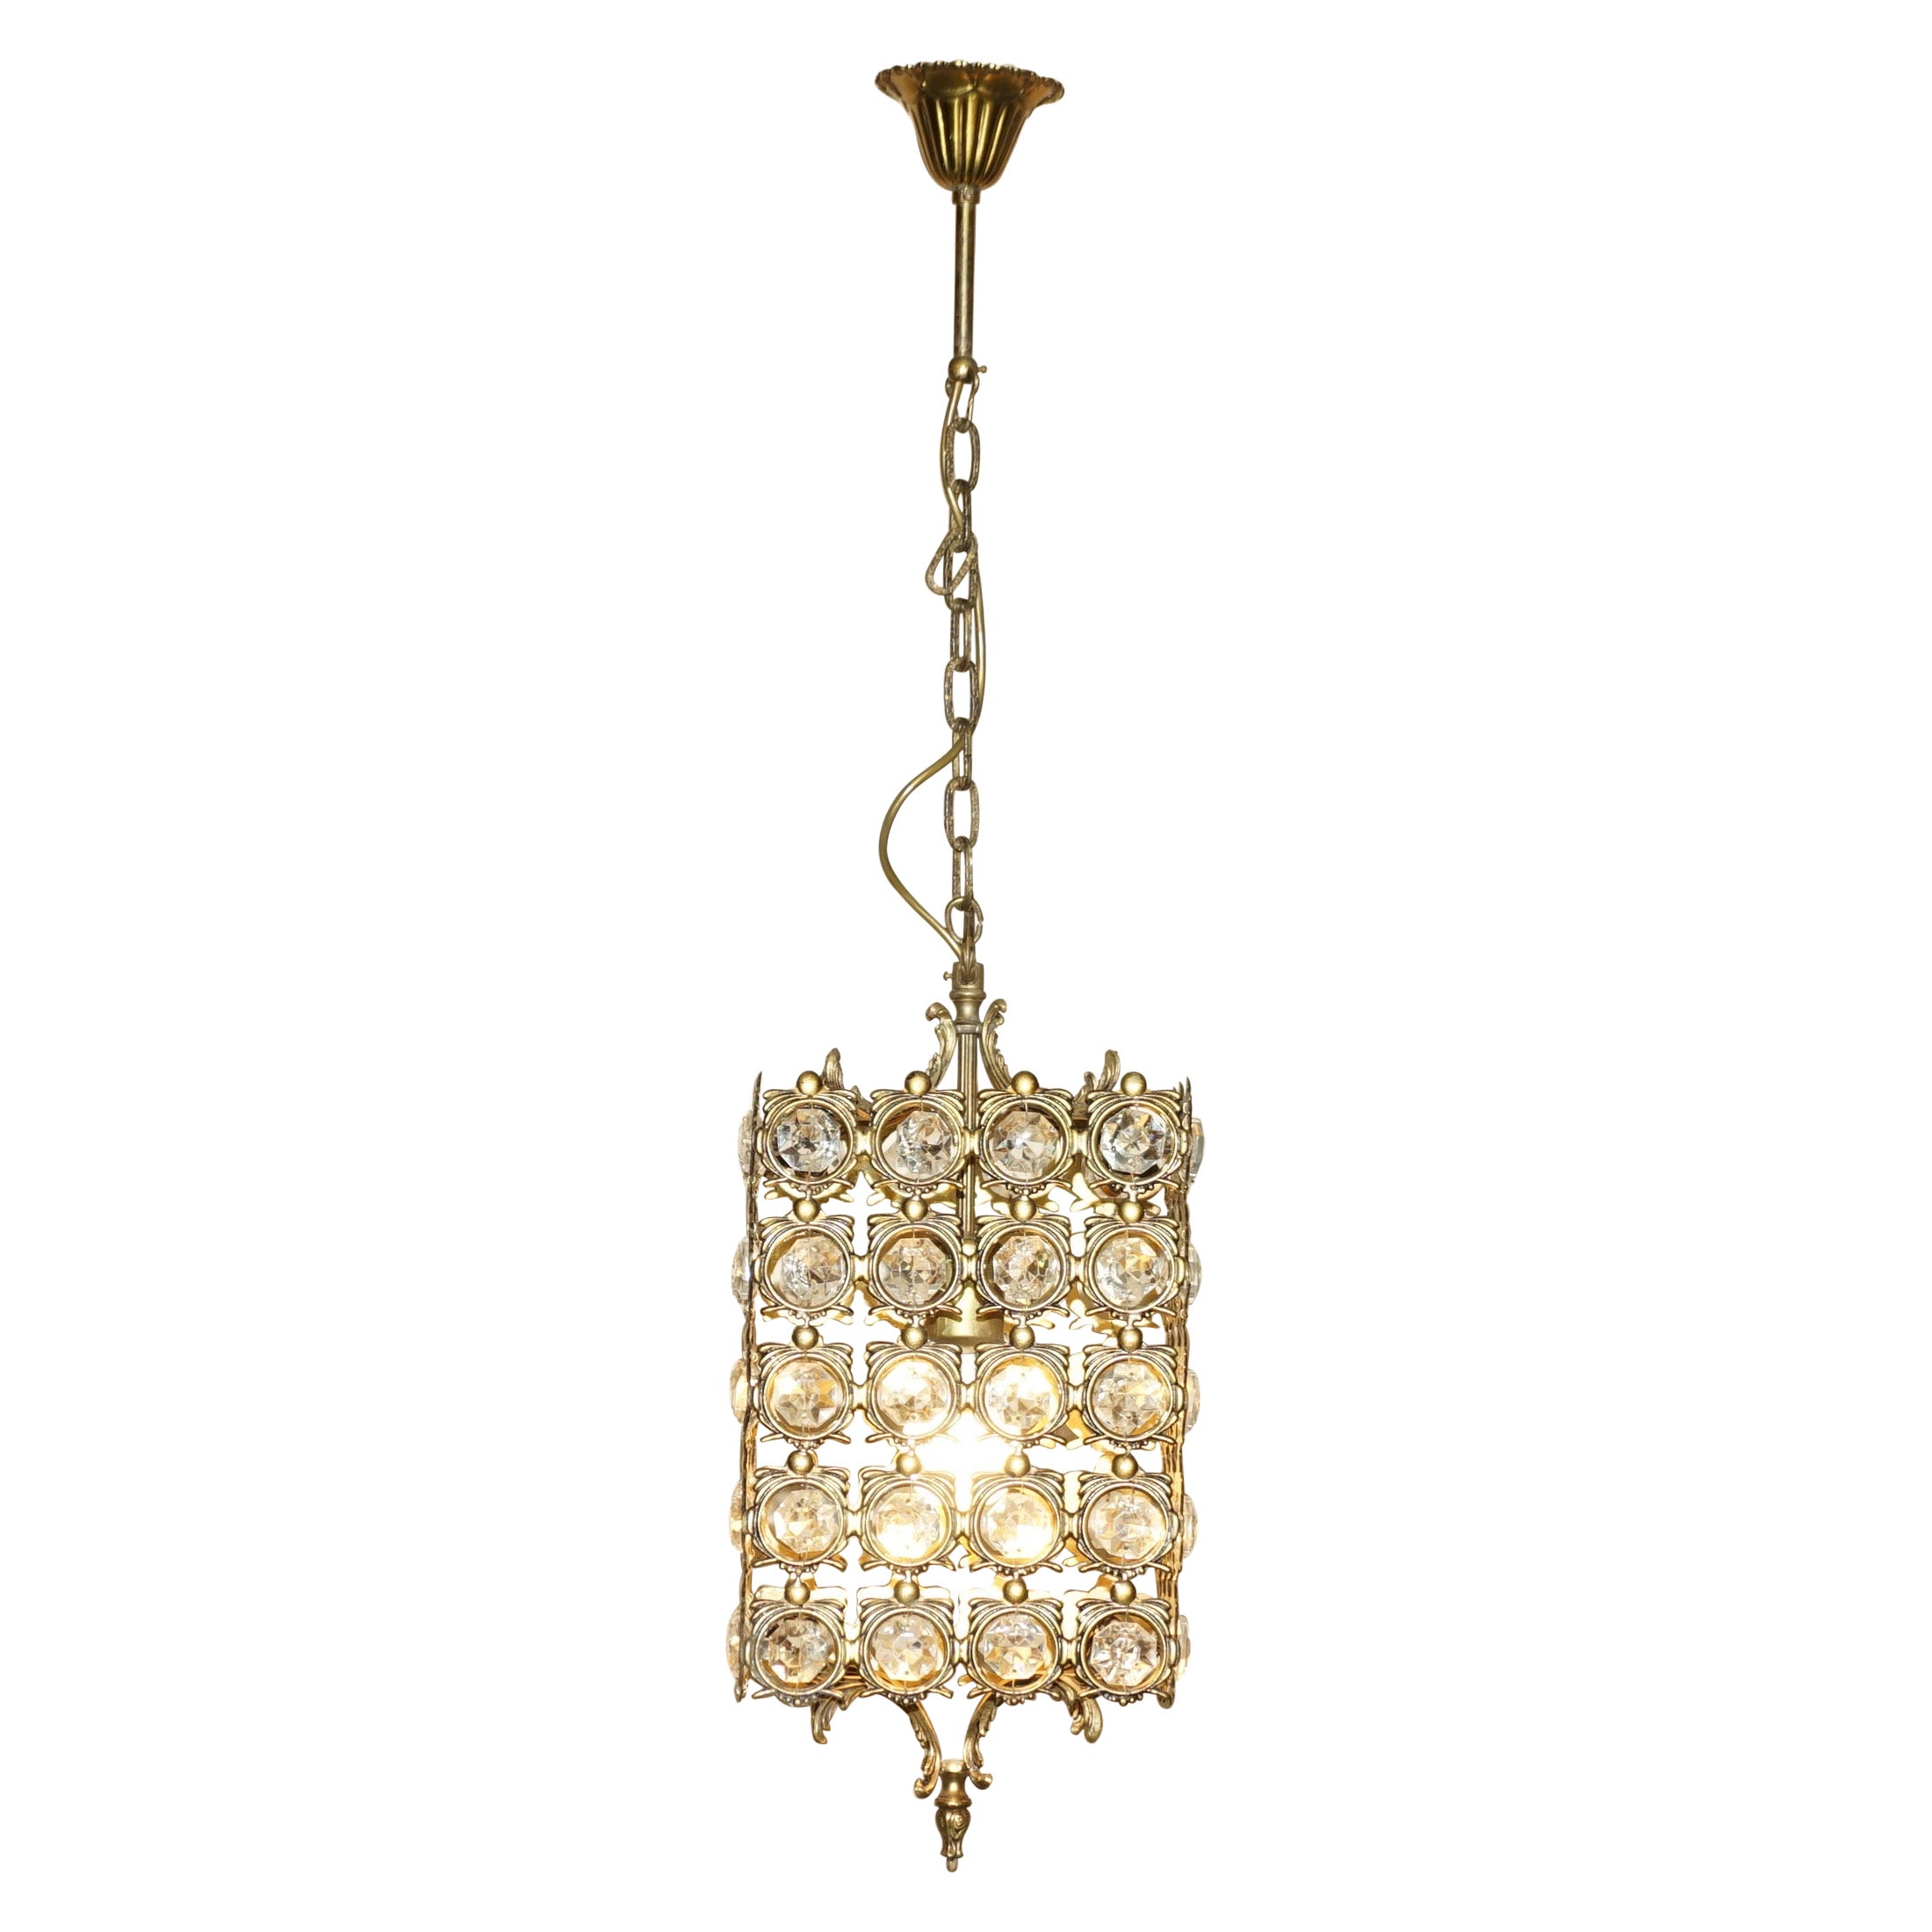 Antique Style Brass & Glass Crystal Cut Hanging Pendent Lantern Ceiling Light 